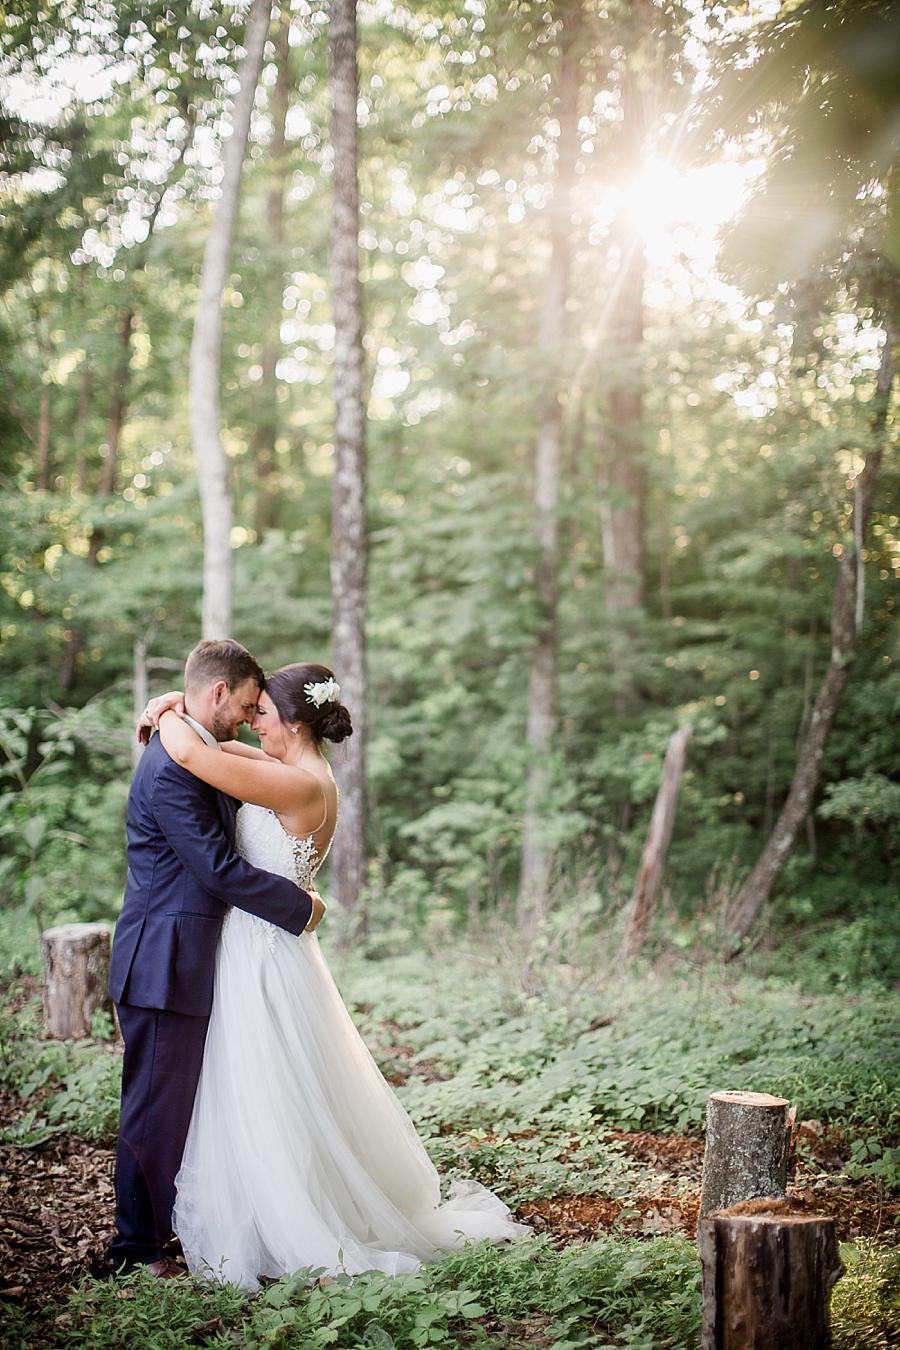 In the ivy at this Estate of Grace Wedding by Knoxville Wedding Photographer, Amanda May Photos.